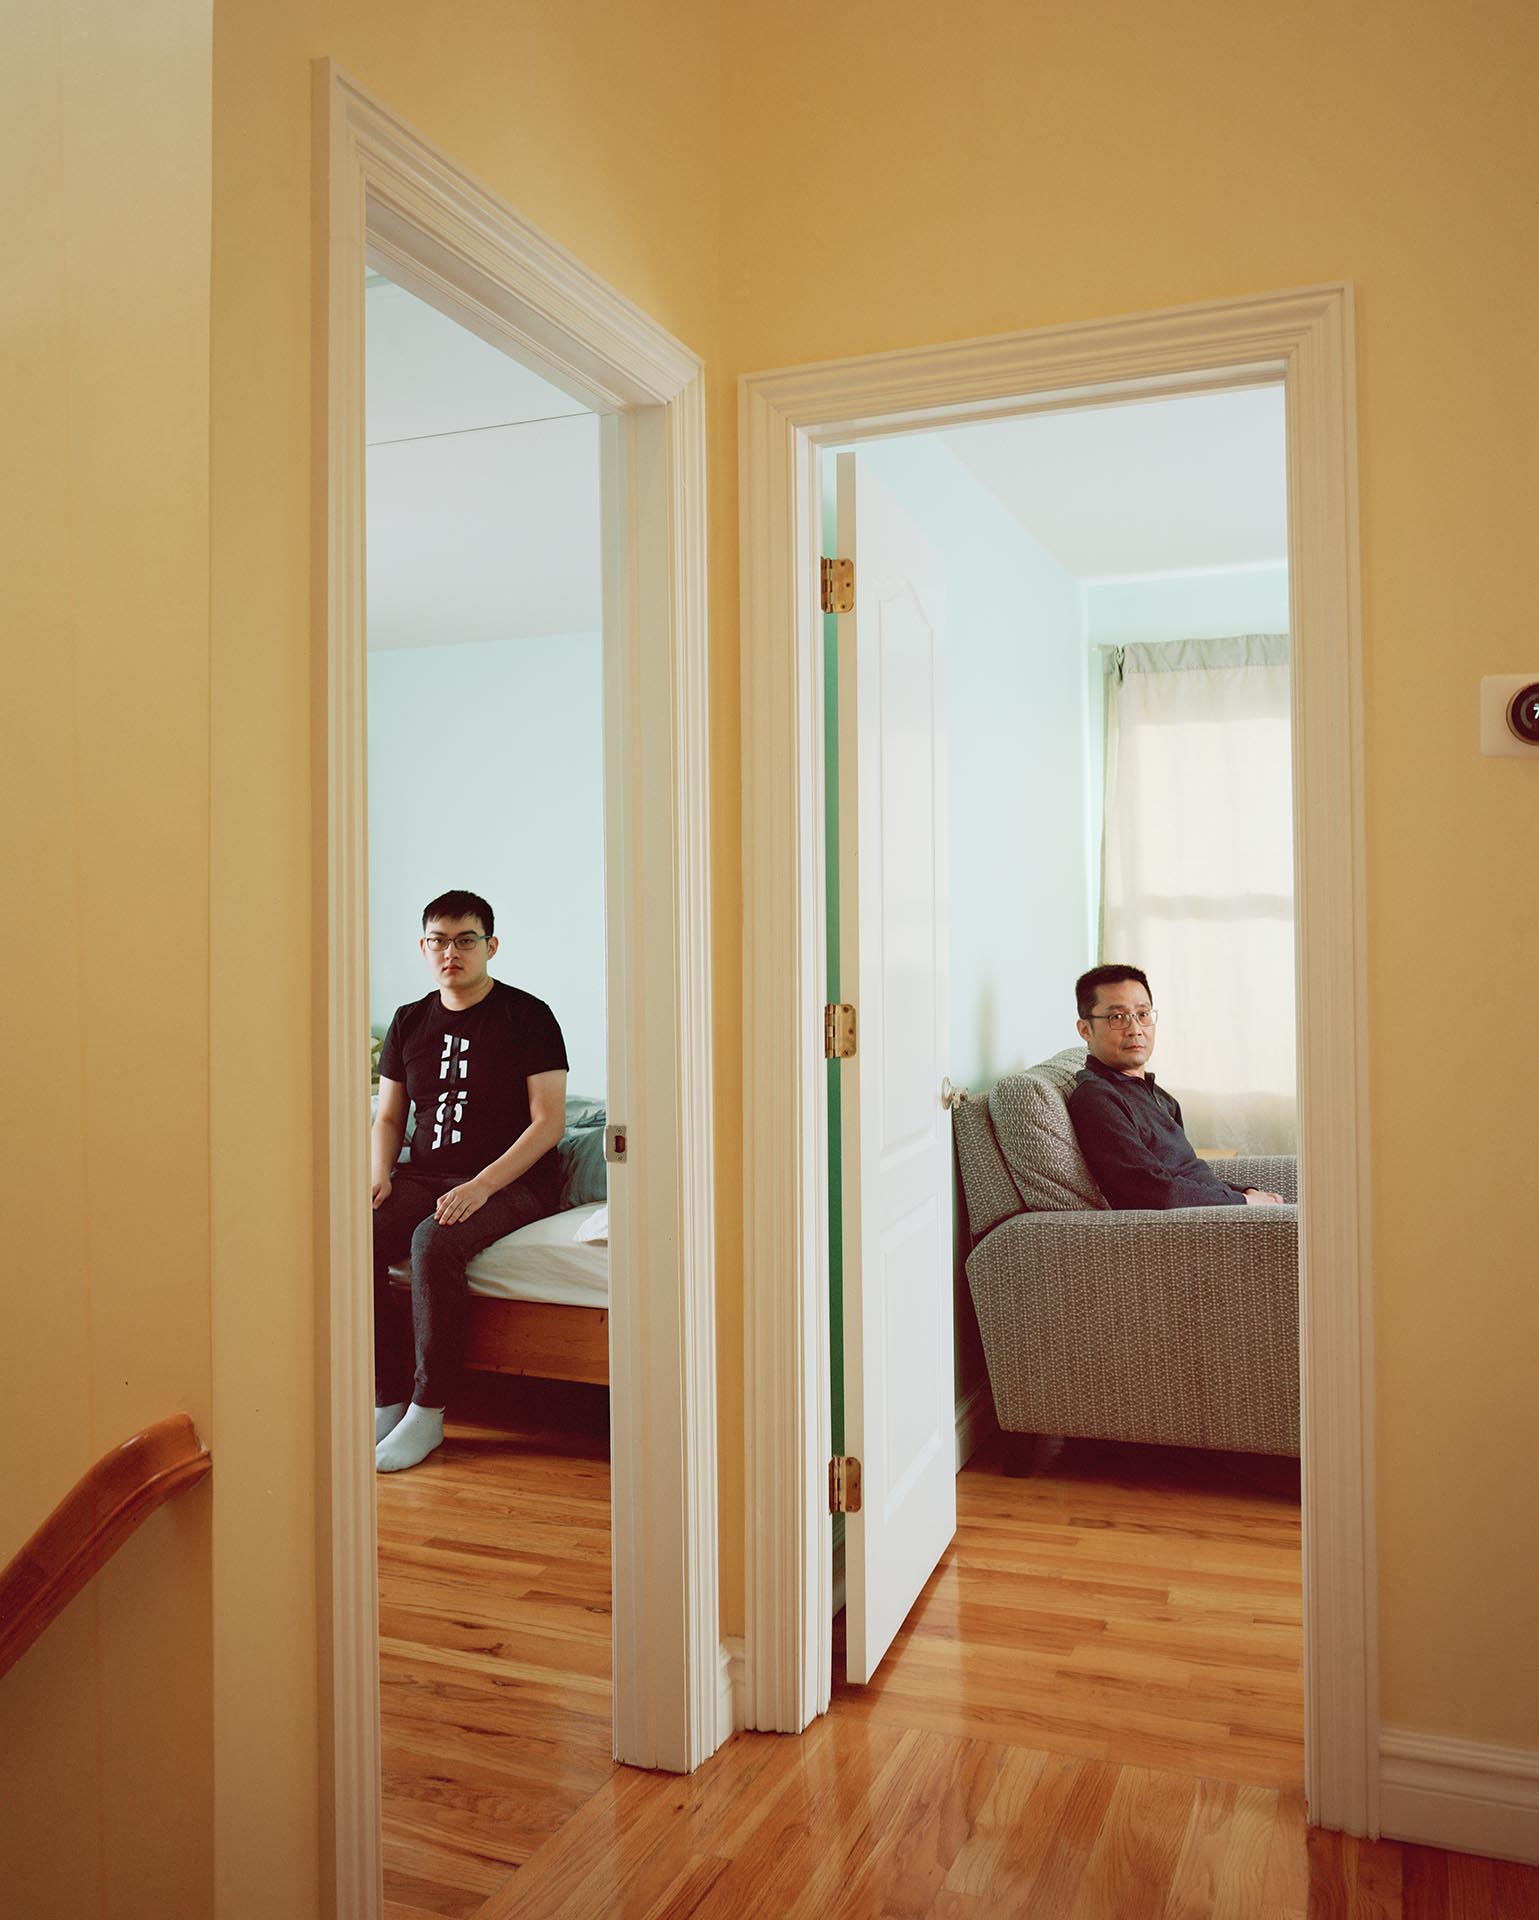 people in separate rooms from hallway